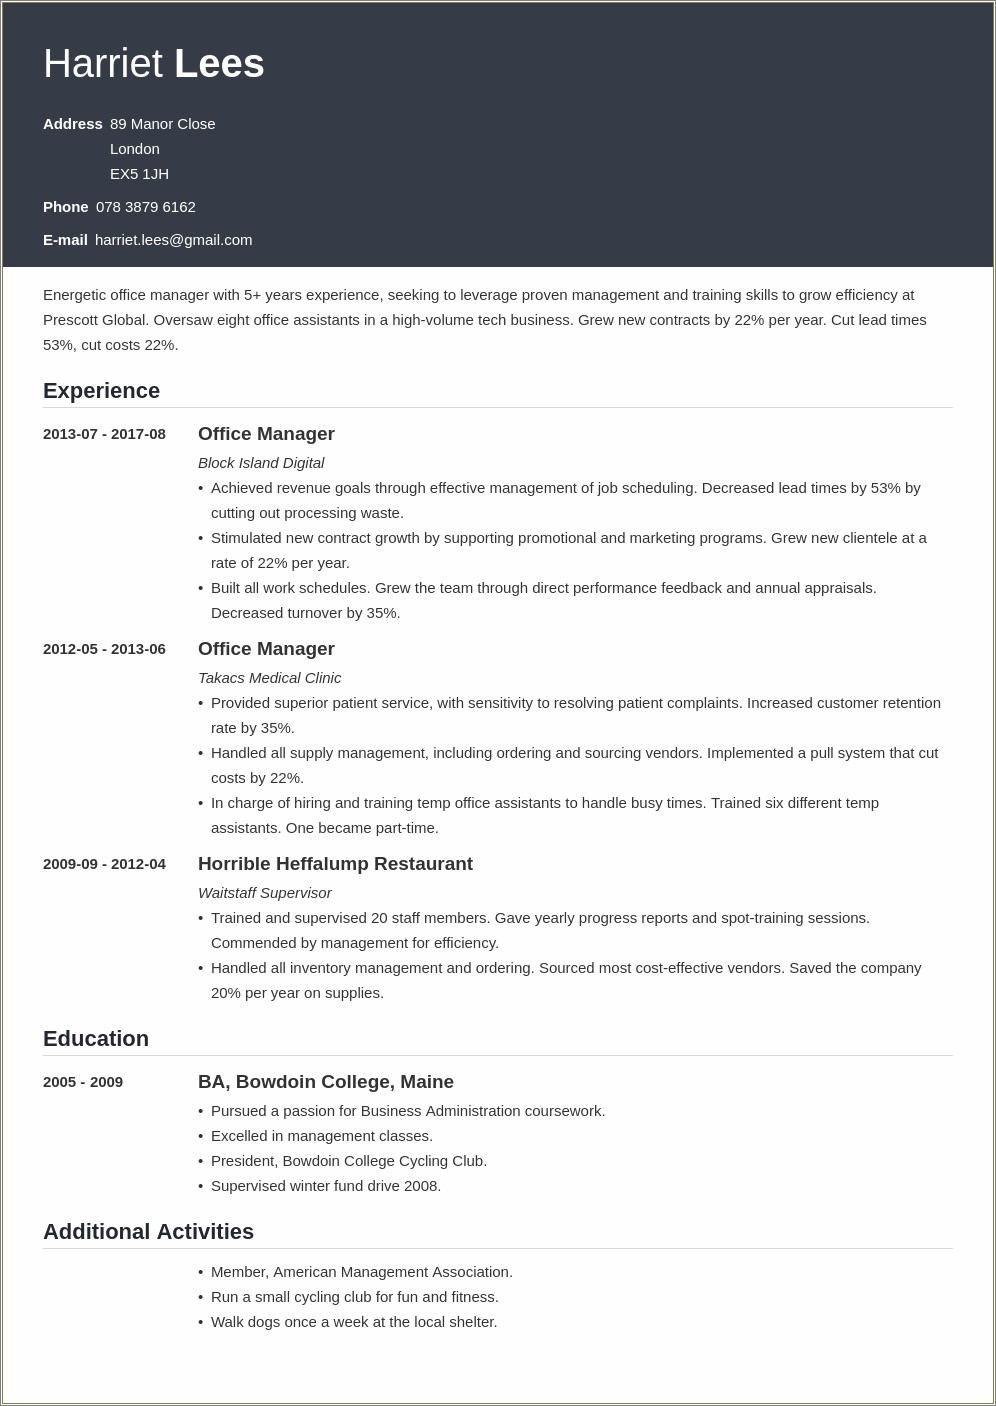 Office Manager Assistant Skills For Resume